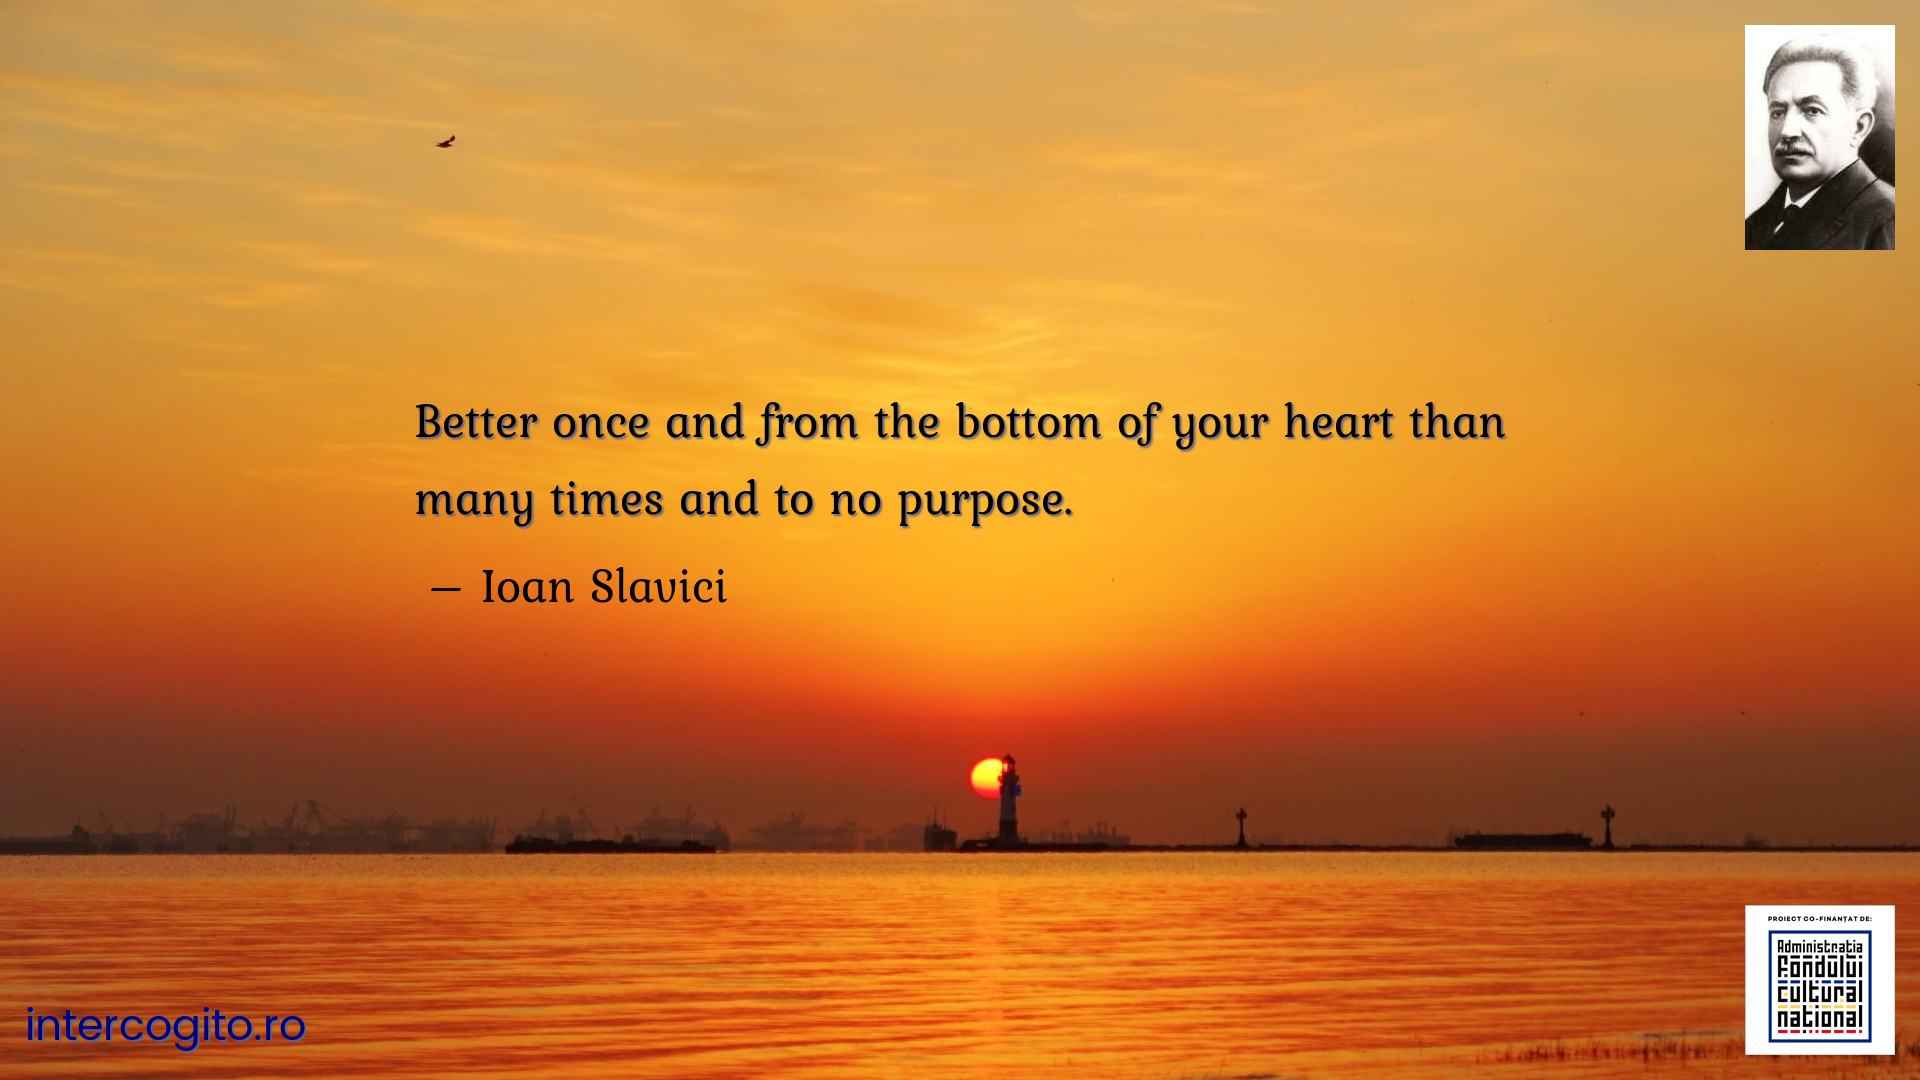 Better once and from the bottom of your heart than many times and to no purpose.